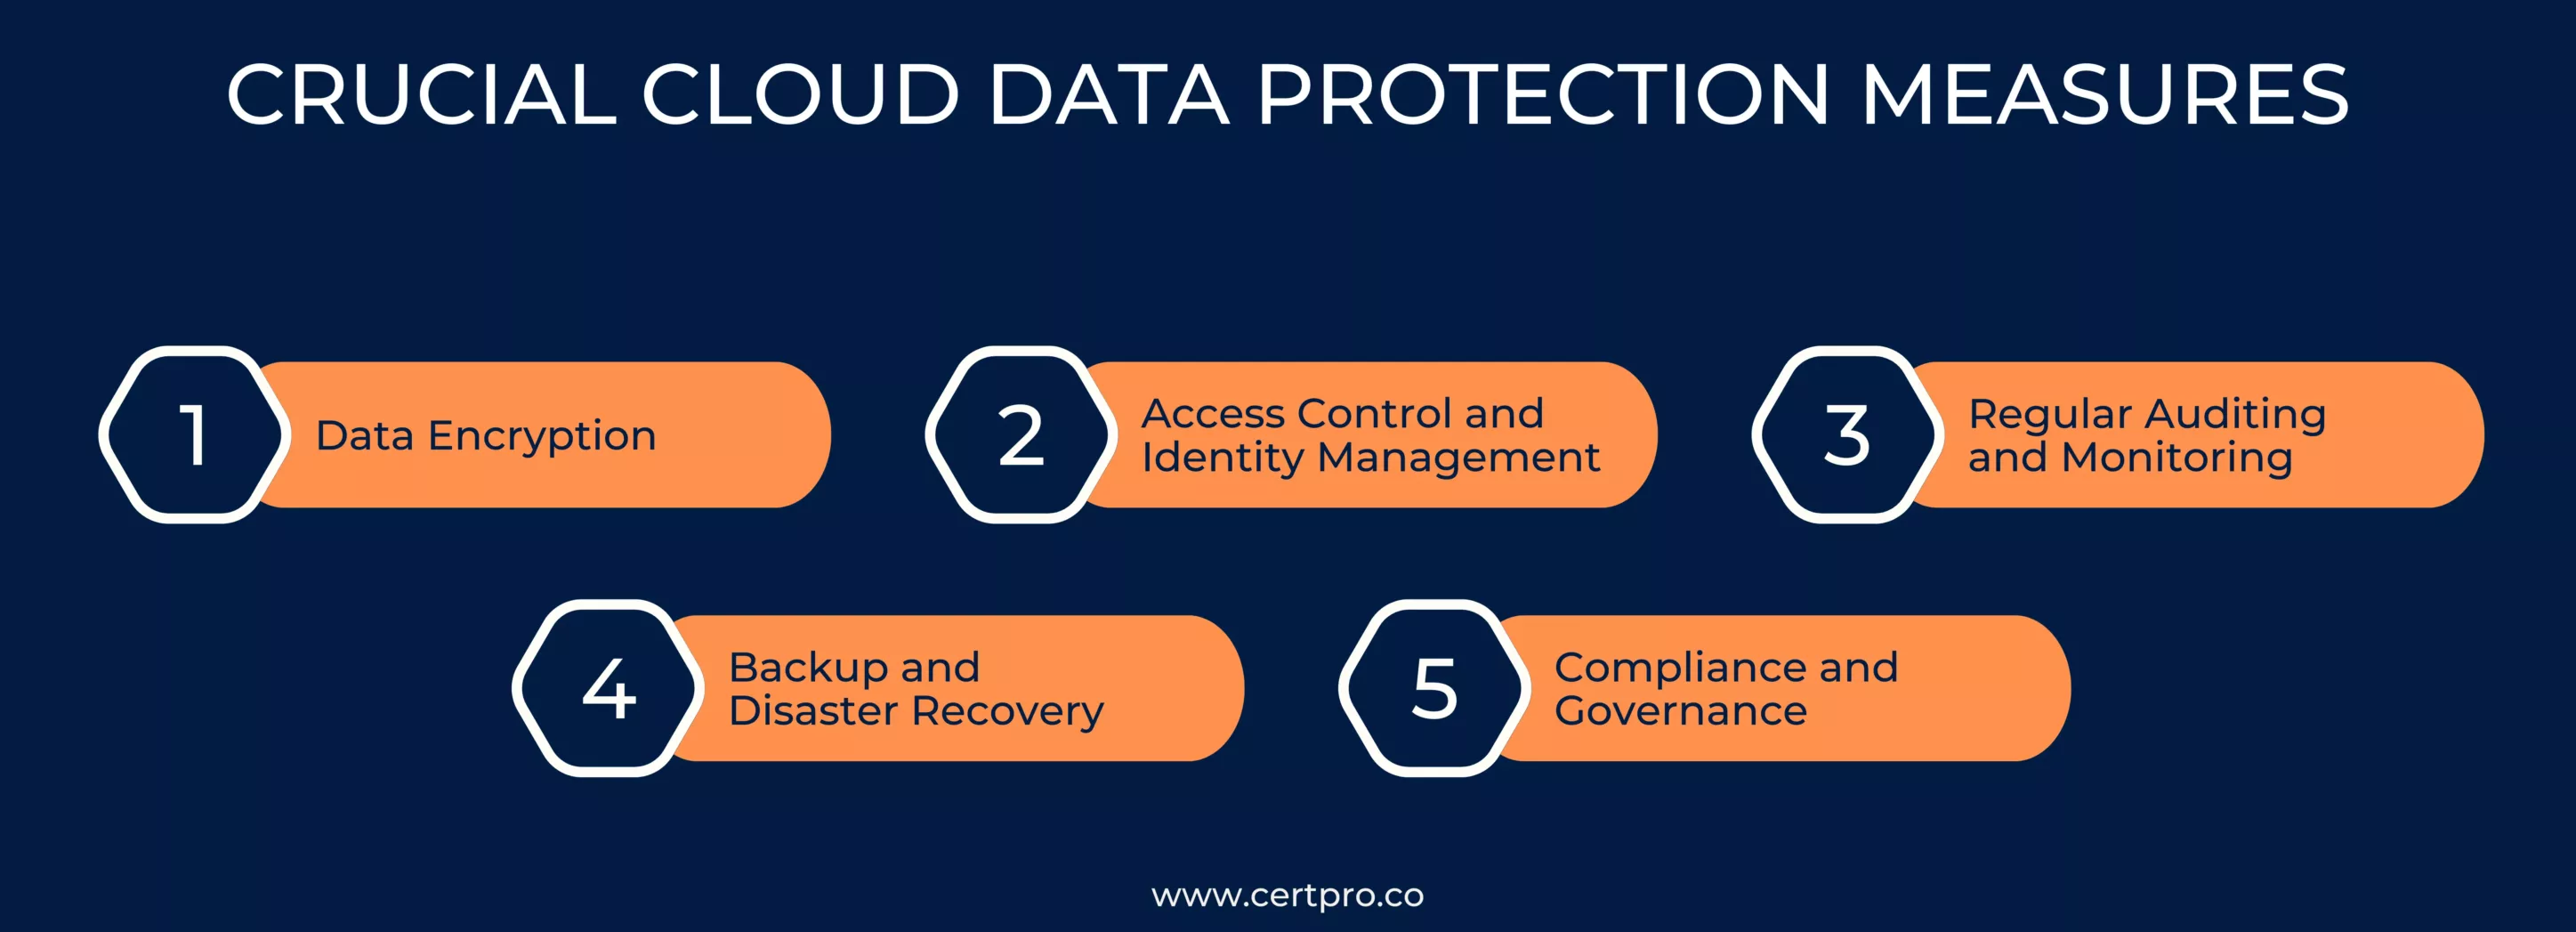 CRUCIAL CLOUD DATA PROTECTION MEASURES